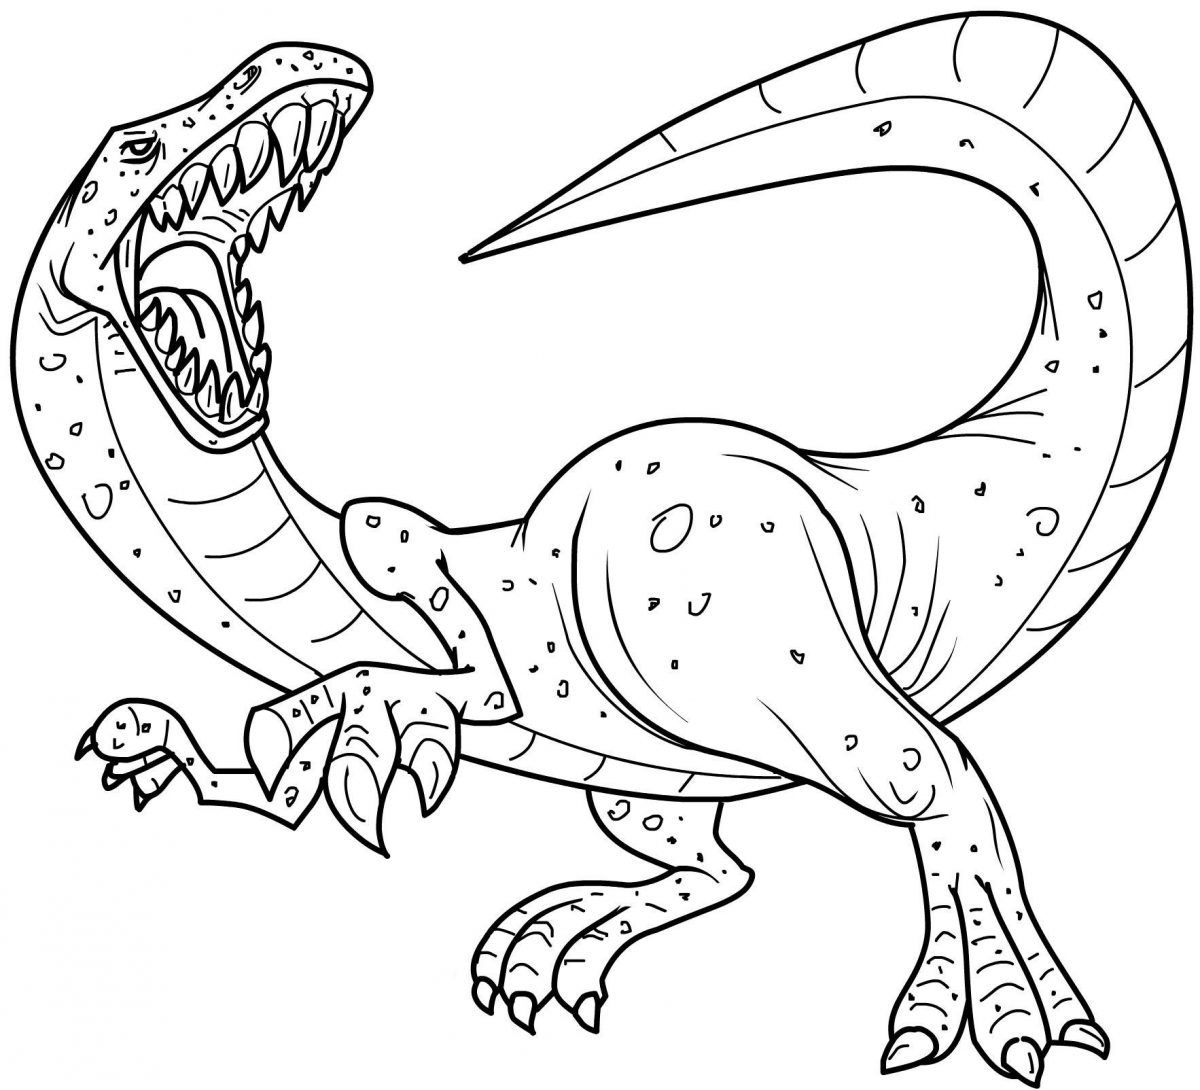 Dinosaurs For Kids - Coloring Pages for Kids and for Adults